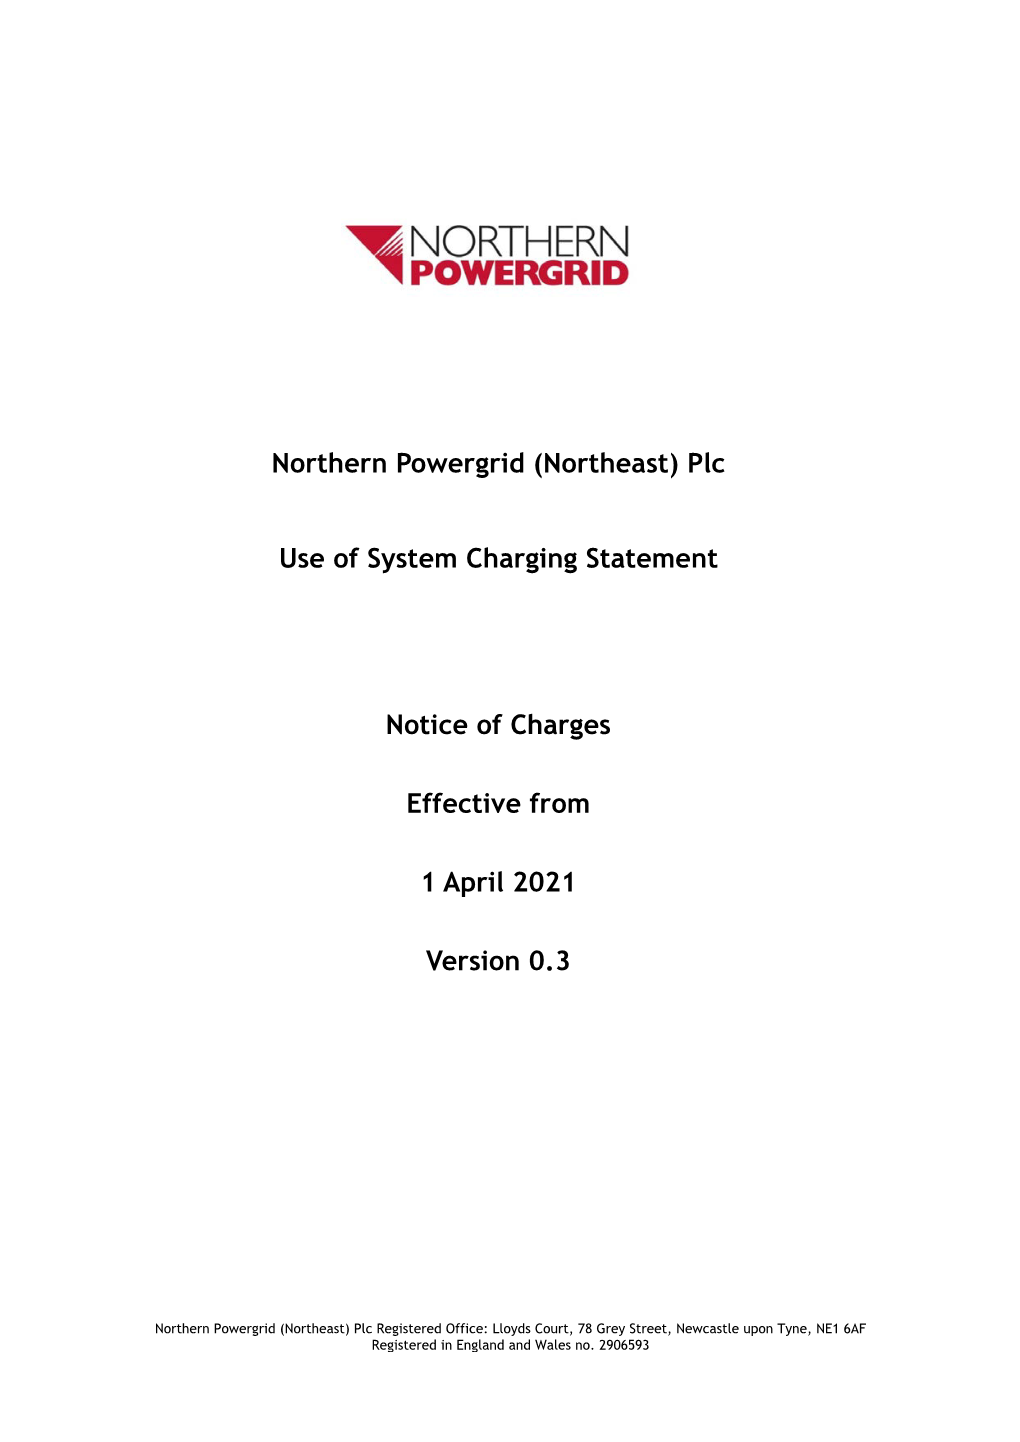 Northern Powergrid (Northeast) Plc Use of System Charging Statement